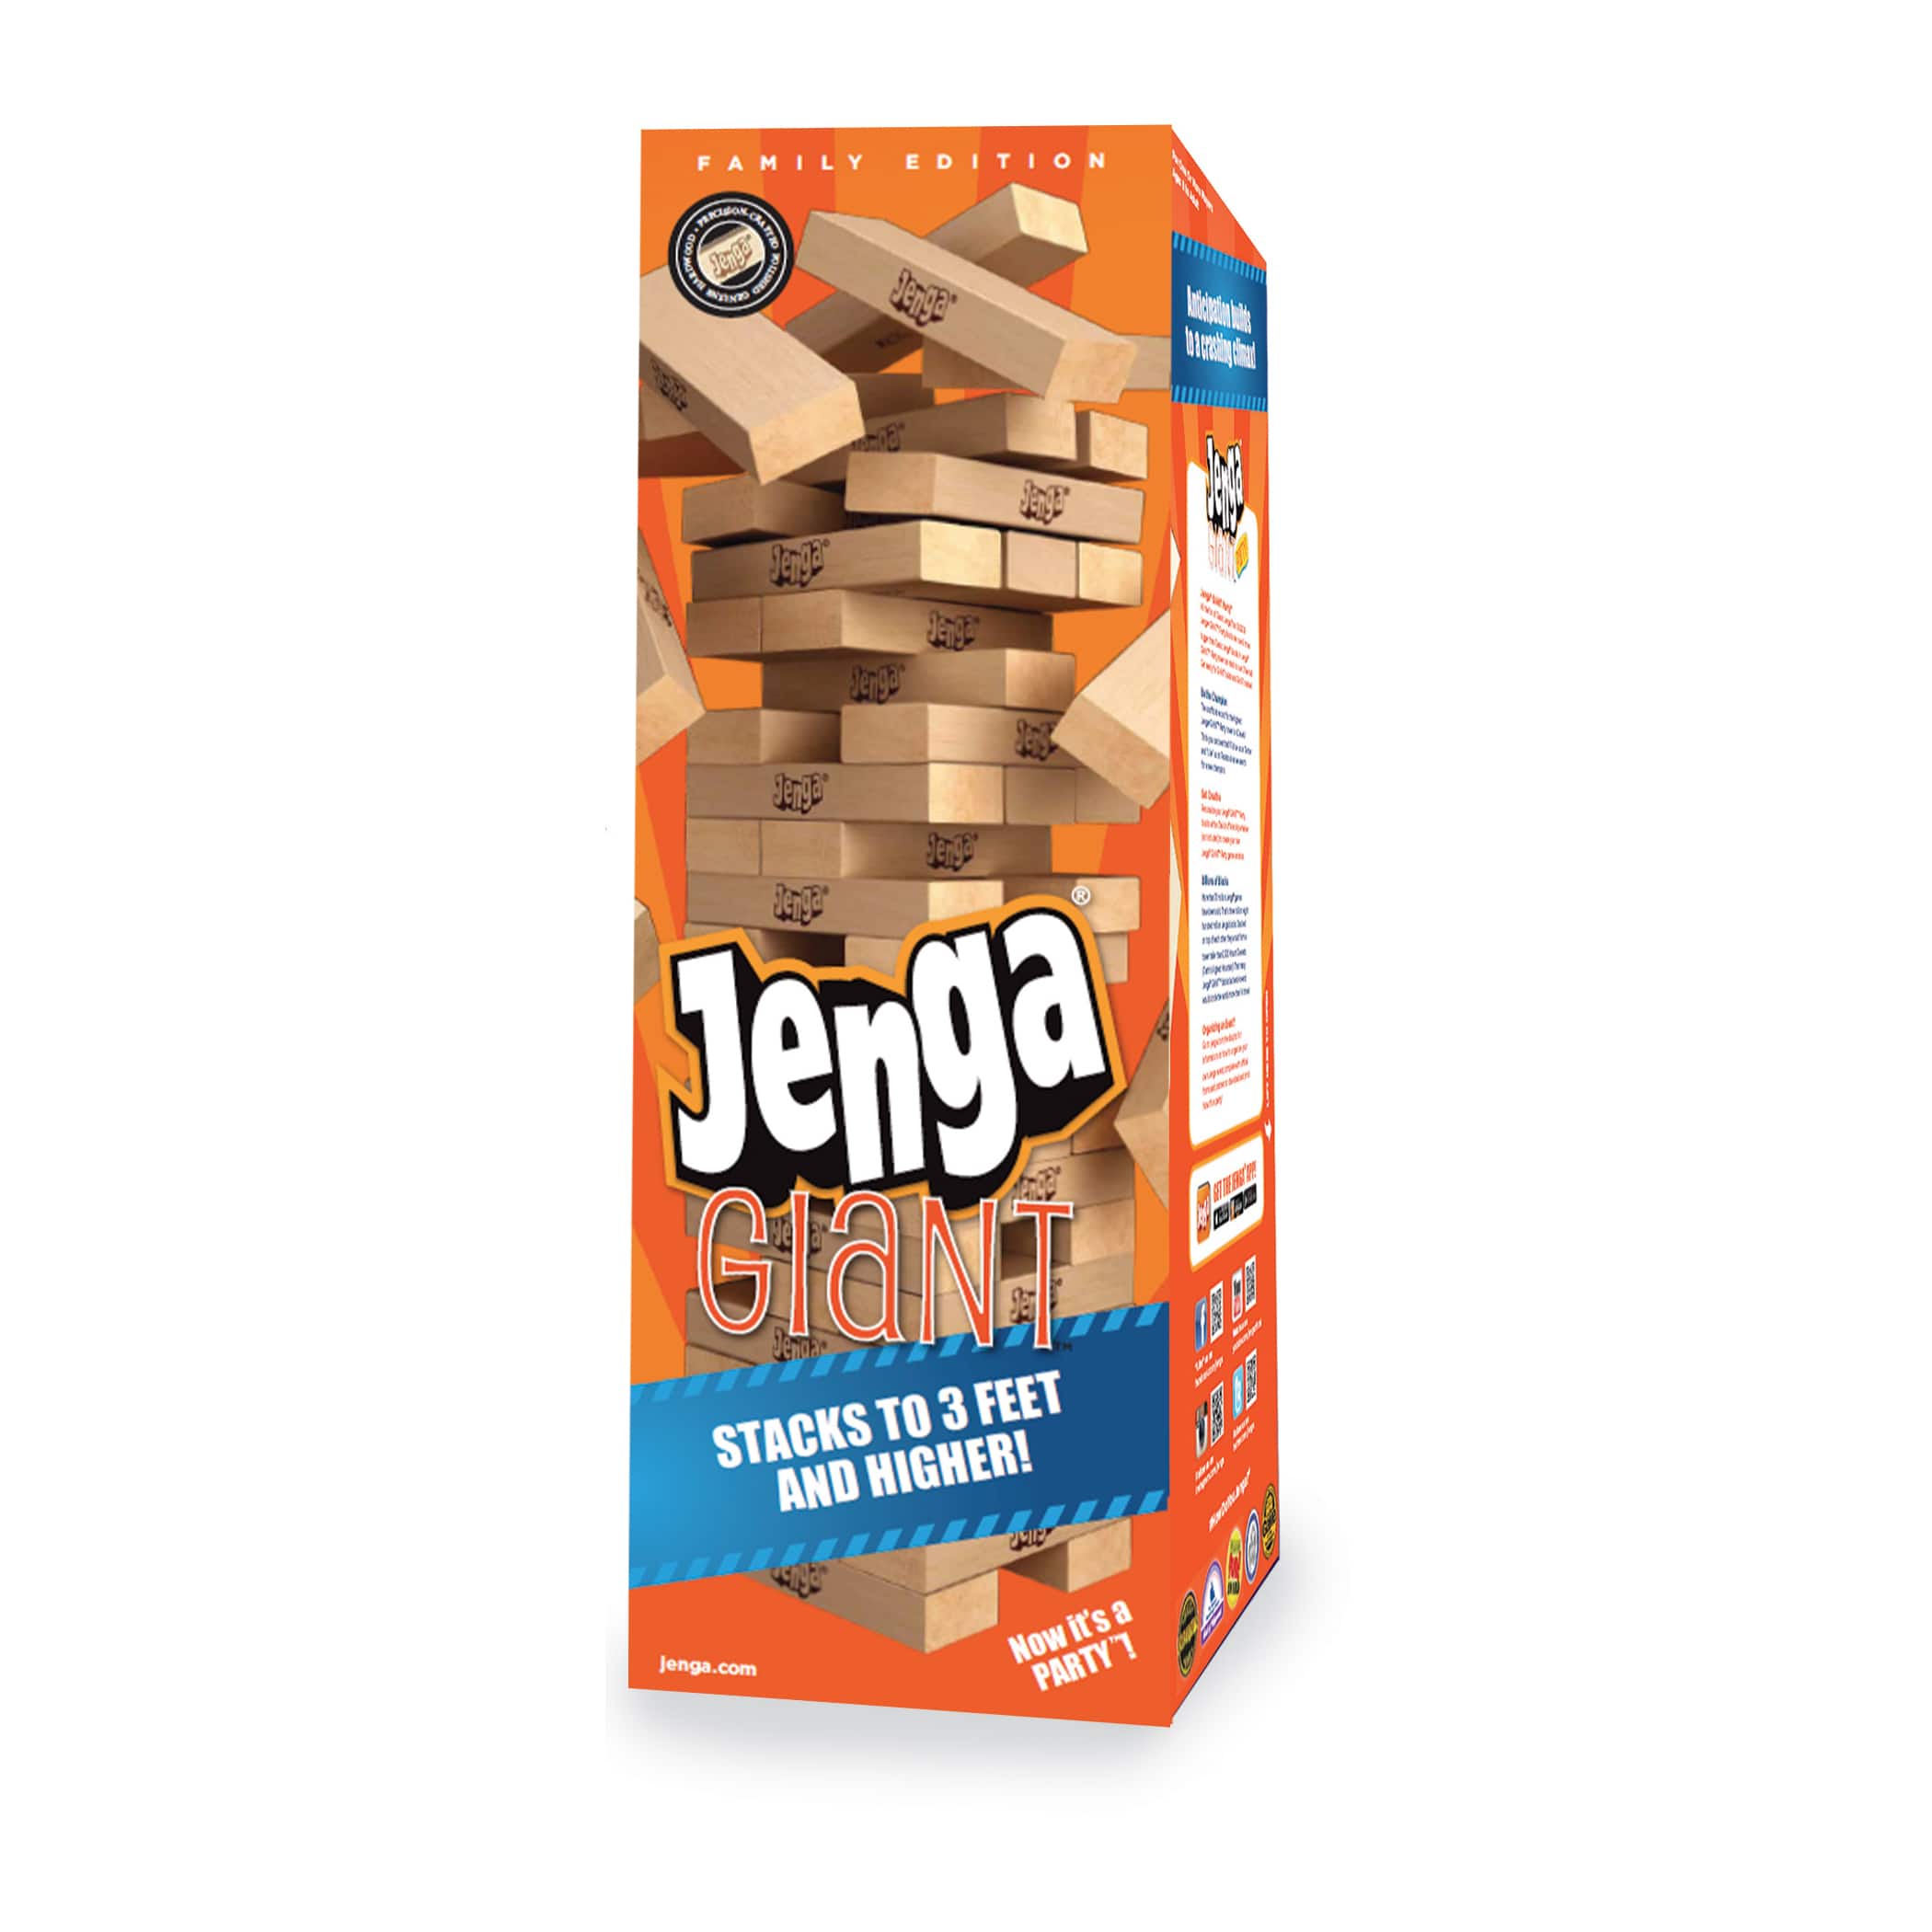 Outdoor and specialty Jenga® games for everybody